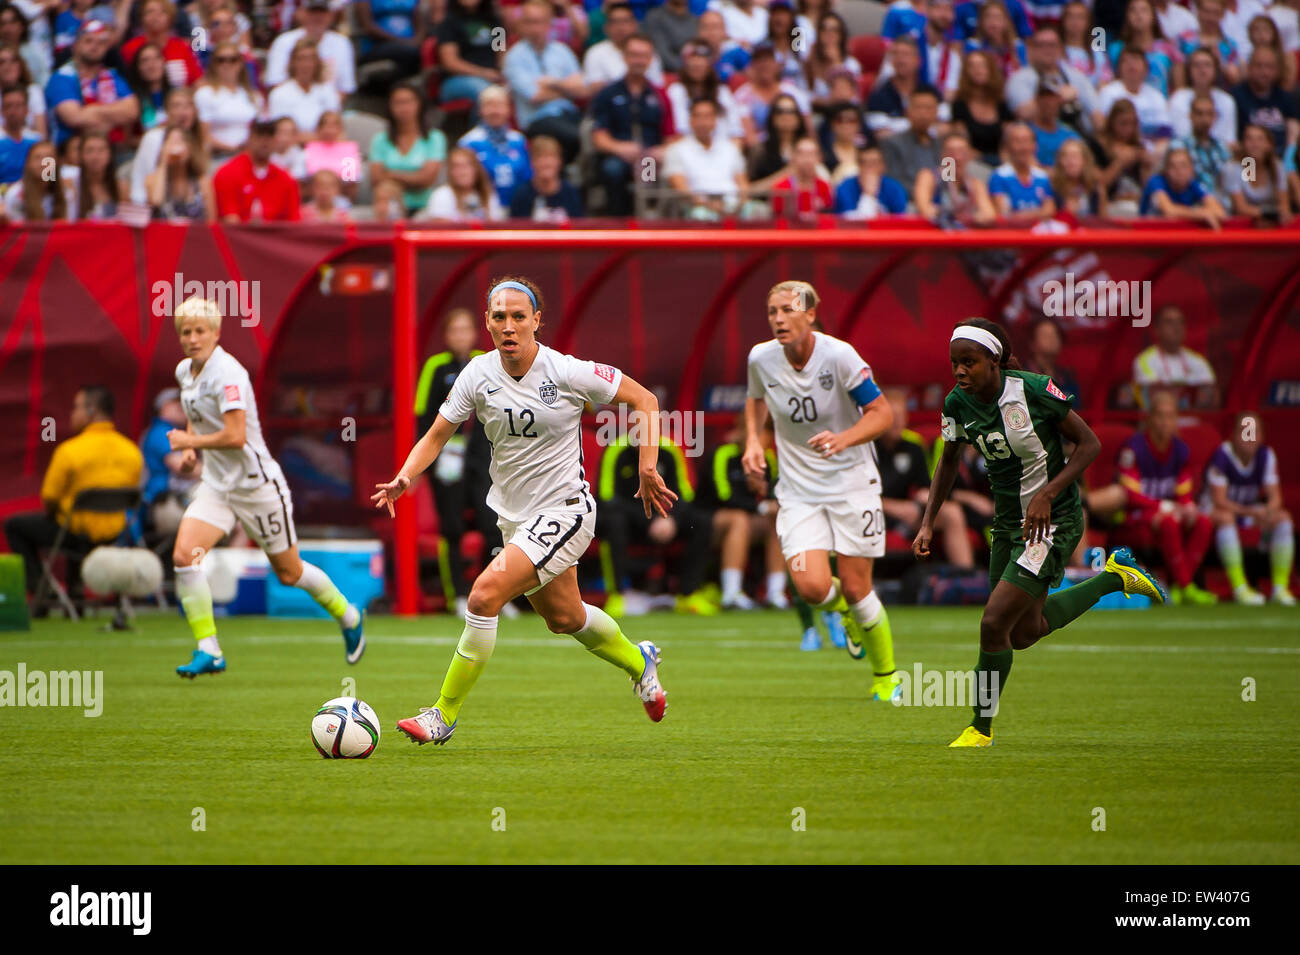 Vancouver, Canada. 16th June, 2015. United States midfielder Lauren Holiday (#12) with the ball during the opening round match between Nigeria and the United States at the FIFA Women's World Cup Canada 2015 at BC Place Stadium. The United States won the match 1-0. Credit:  Matt Jacques/Alamy Live News Stock Photo